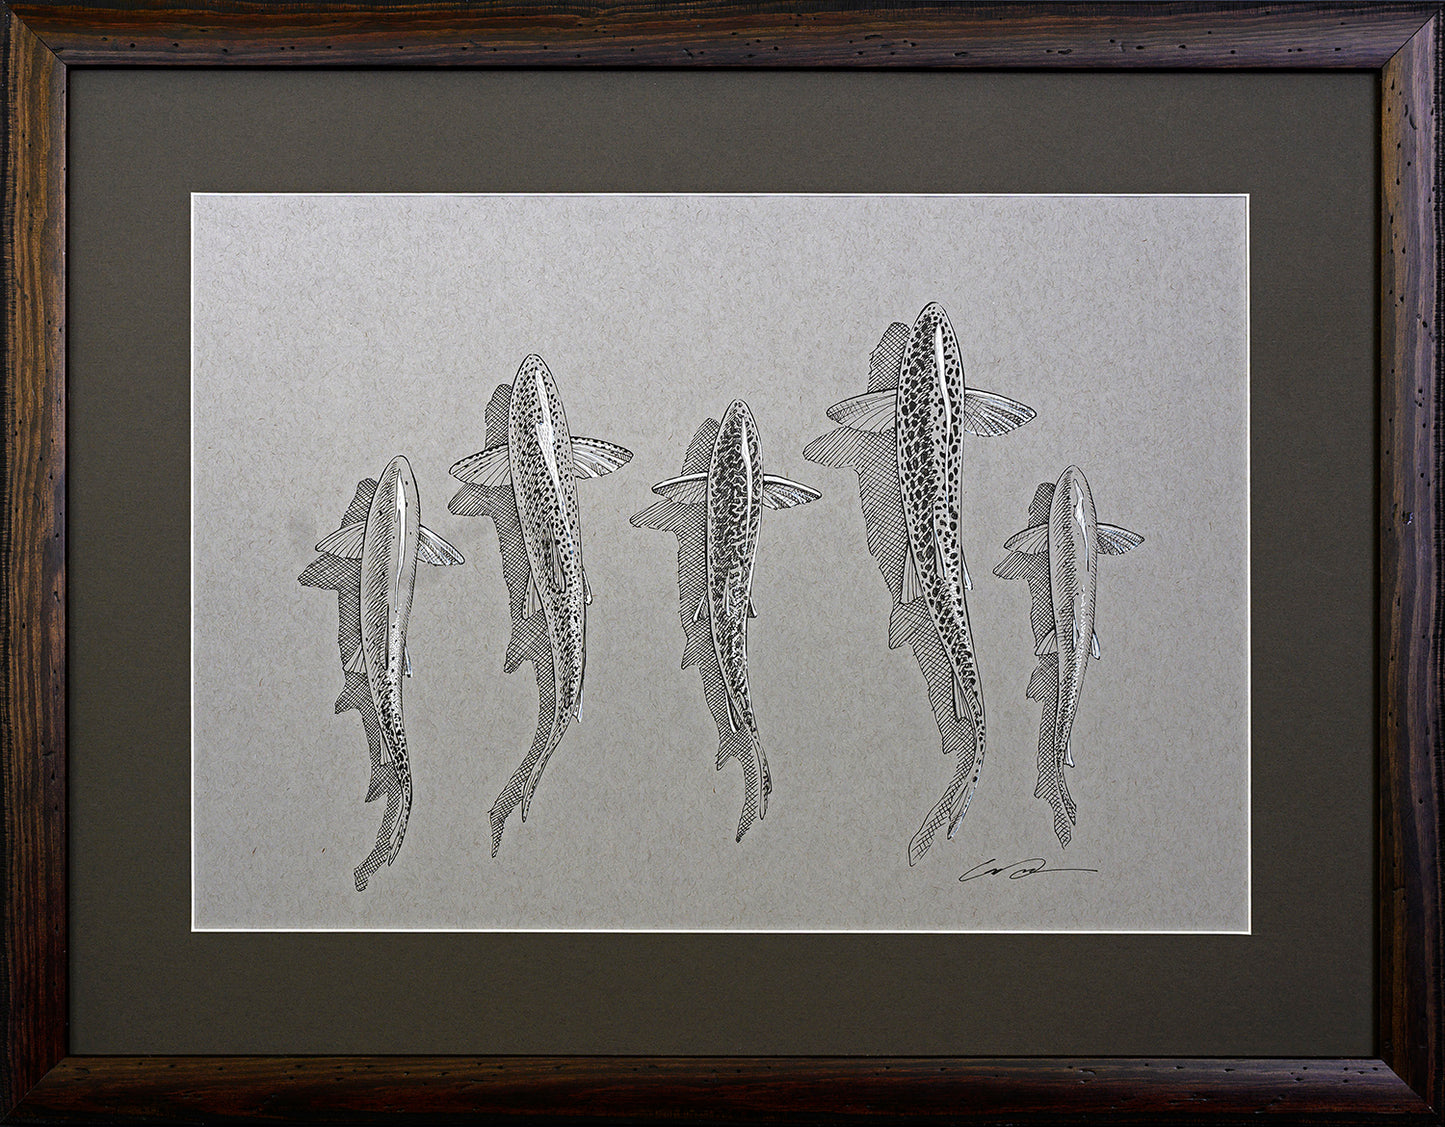 A black and white drawing of five trout from above inside a wooden frame